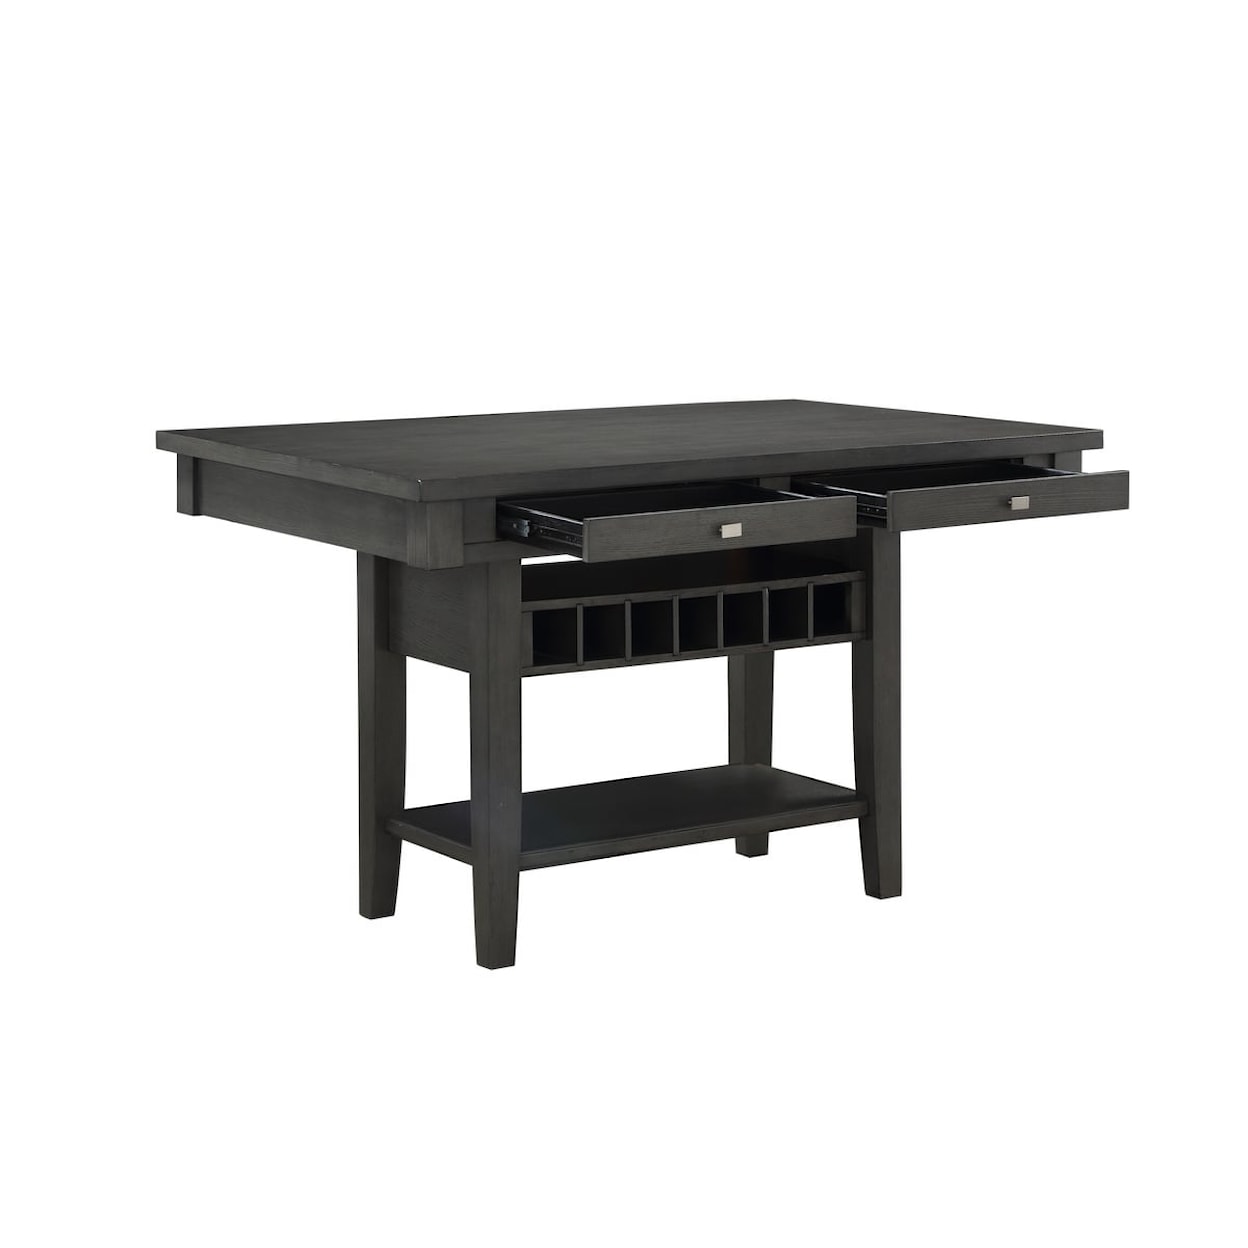 Homelegance Furniture Baresford Counter Height Table